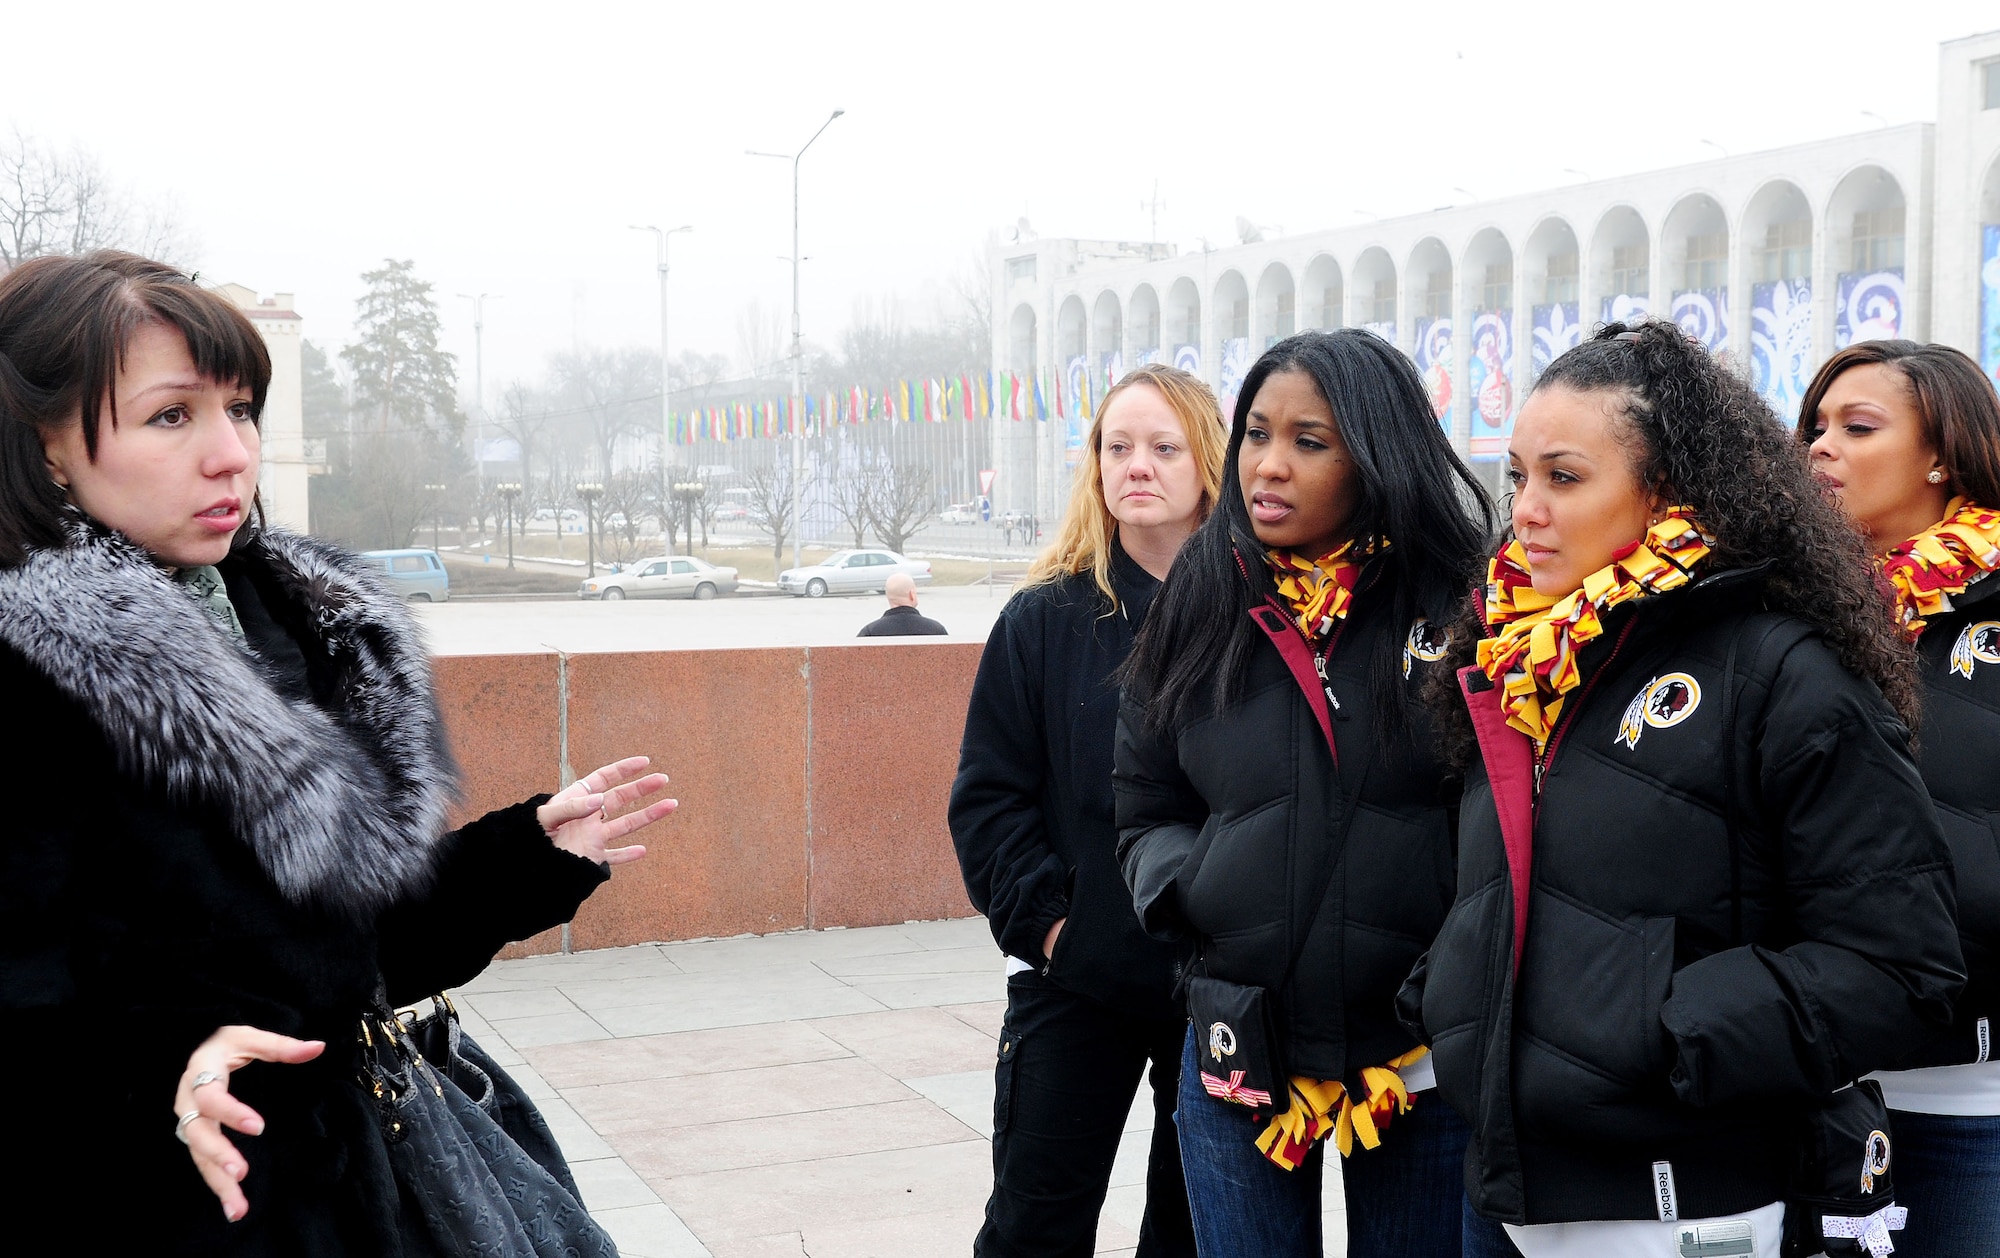 Senior Airman Maria Gates, 376th Air Expeditionary Wing translator and native of Kyrgyzstan, speaks of the history and culture of the land to the Washington Redskins cheerleaders on a tour of downtown Bishkek, Kyrgyzstan, Jan. 27, 2010. The cheerleaders are on tour sponsored by the Armed Forces Entertainment. The Transit Center at Manas is their first stop in a two-week long tour where they will perform for Airmen, Soldiers, Sailors and Marines deployed overseas. (U.S. Air Force photo/Senior Airman Nichelle Anderson/Released)